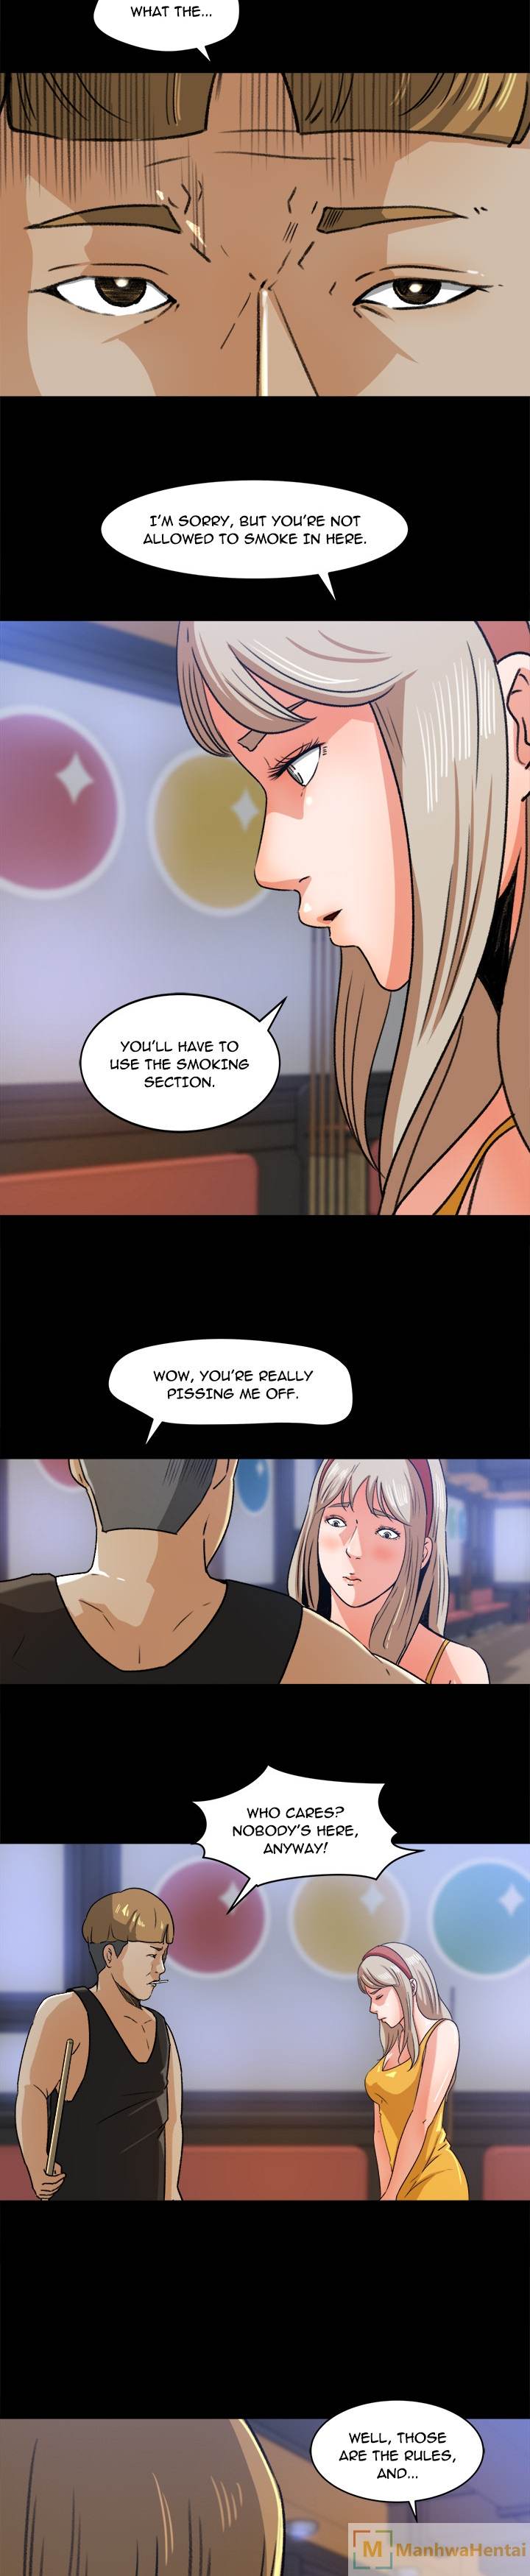 Inside the Uniform - Chapter 28 Page 8